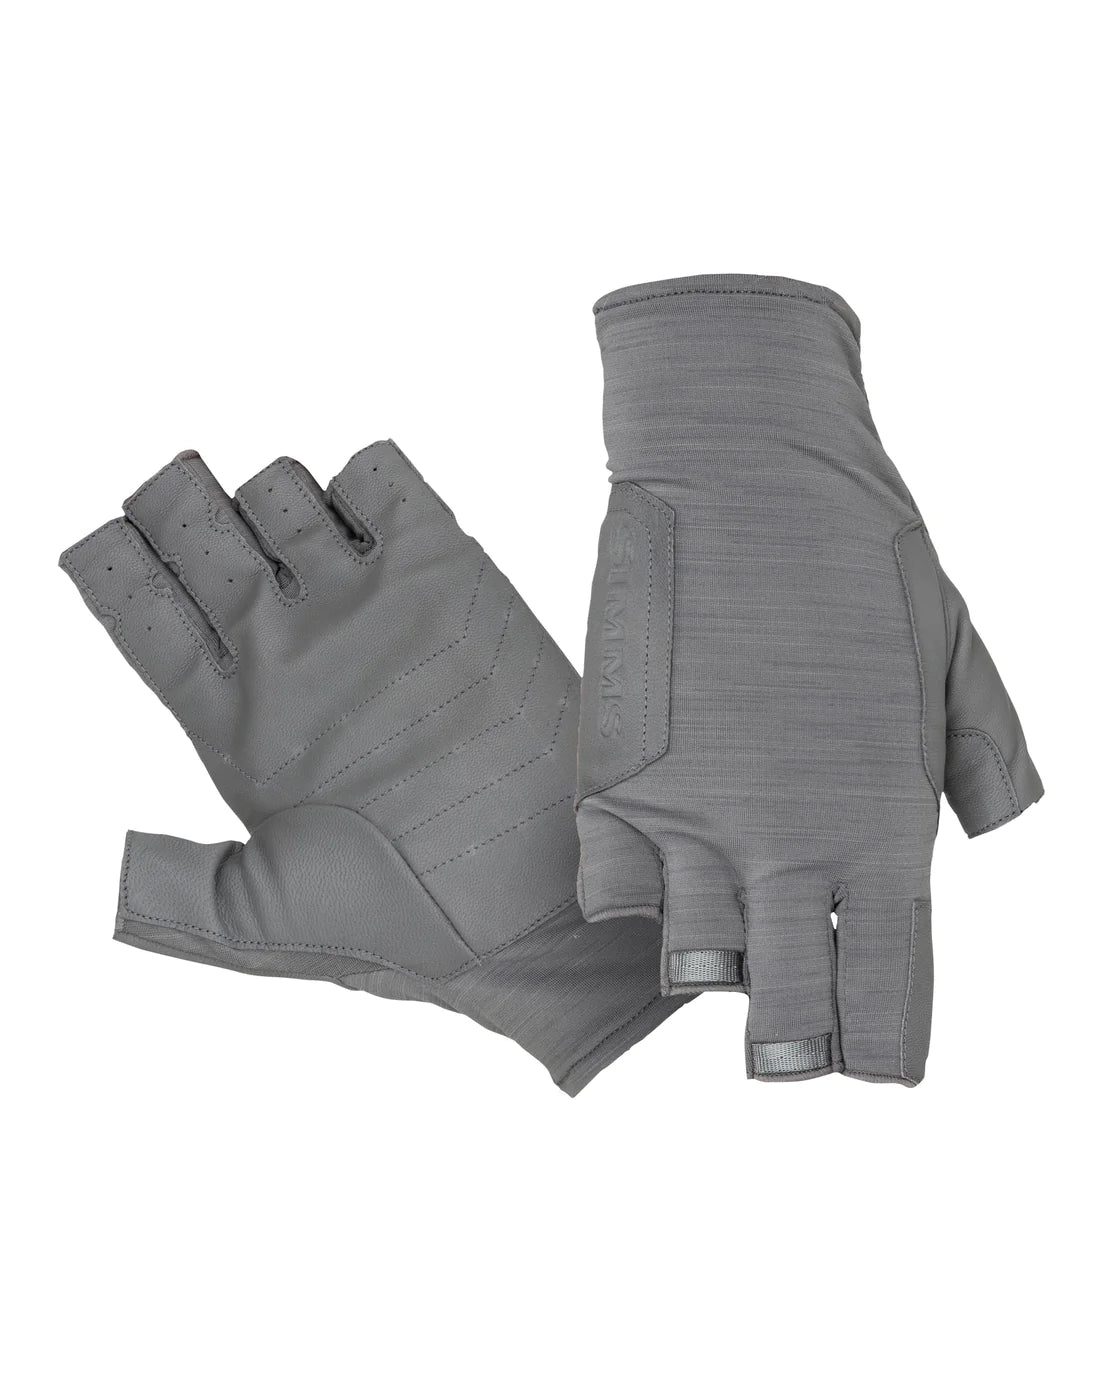 Simms Solarflex Guide Glove - LARGE / STERLING - Mansfield Hunting & Fishing - Products to prepare for Corona Virus